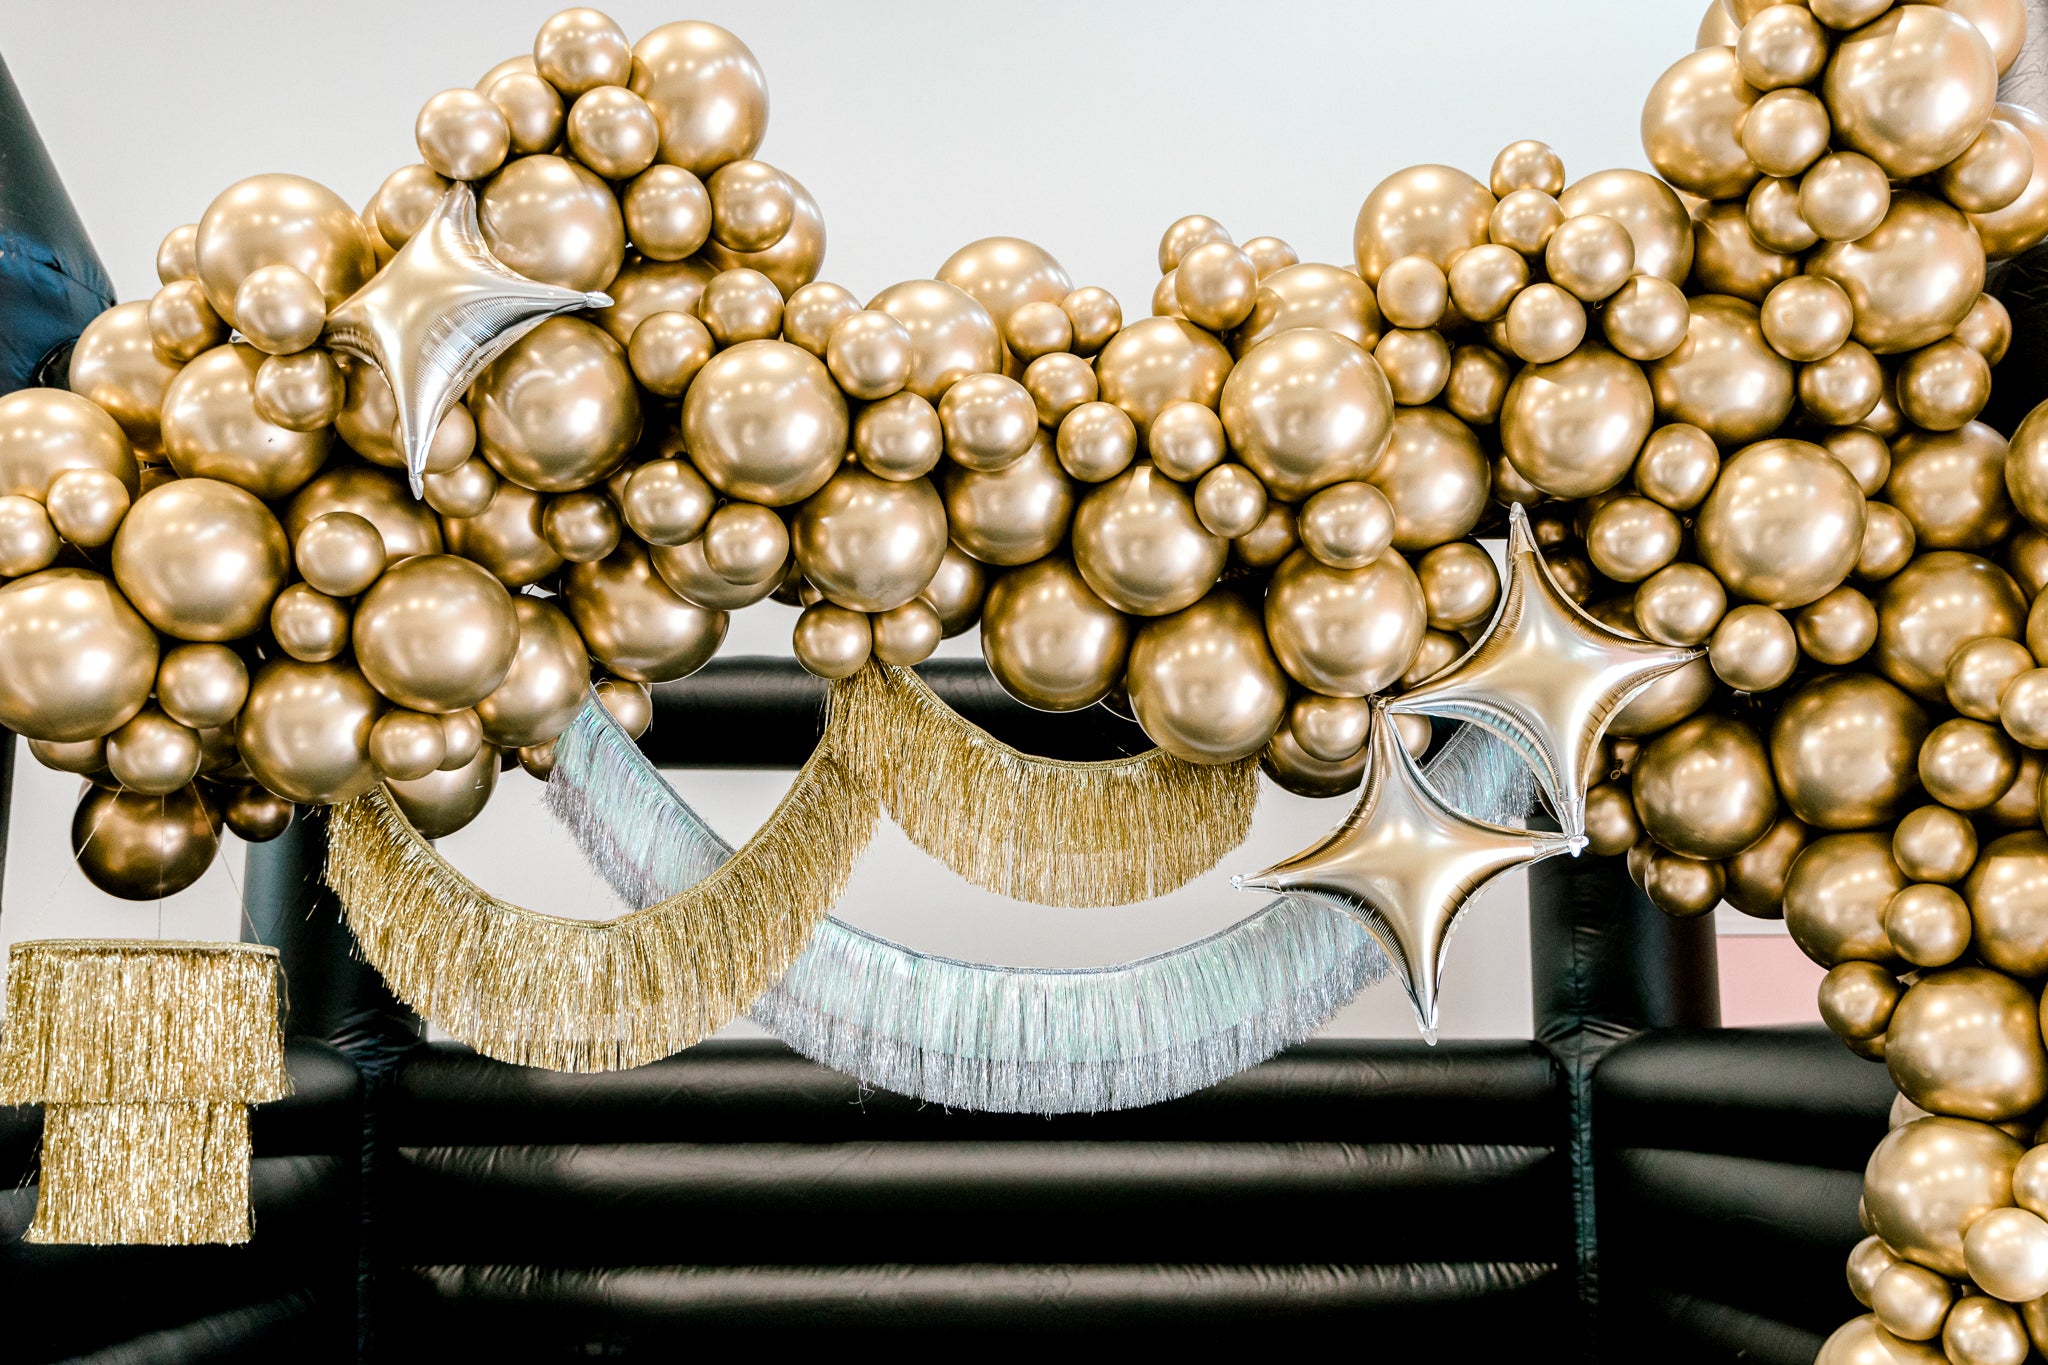 Silver and gold balloon garland on a bounce house for a fun New Years Eve party